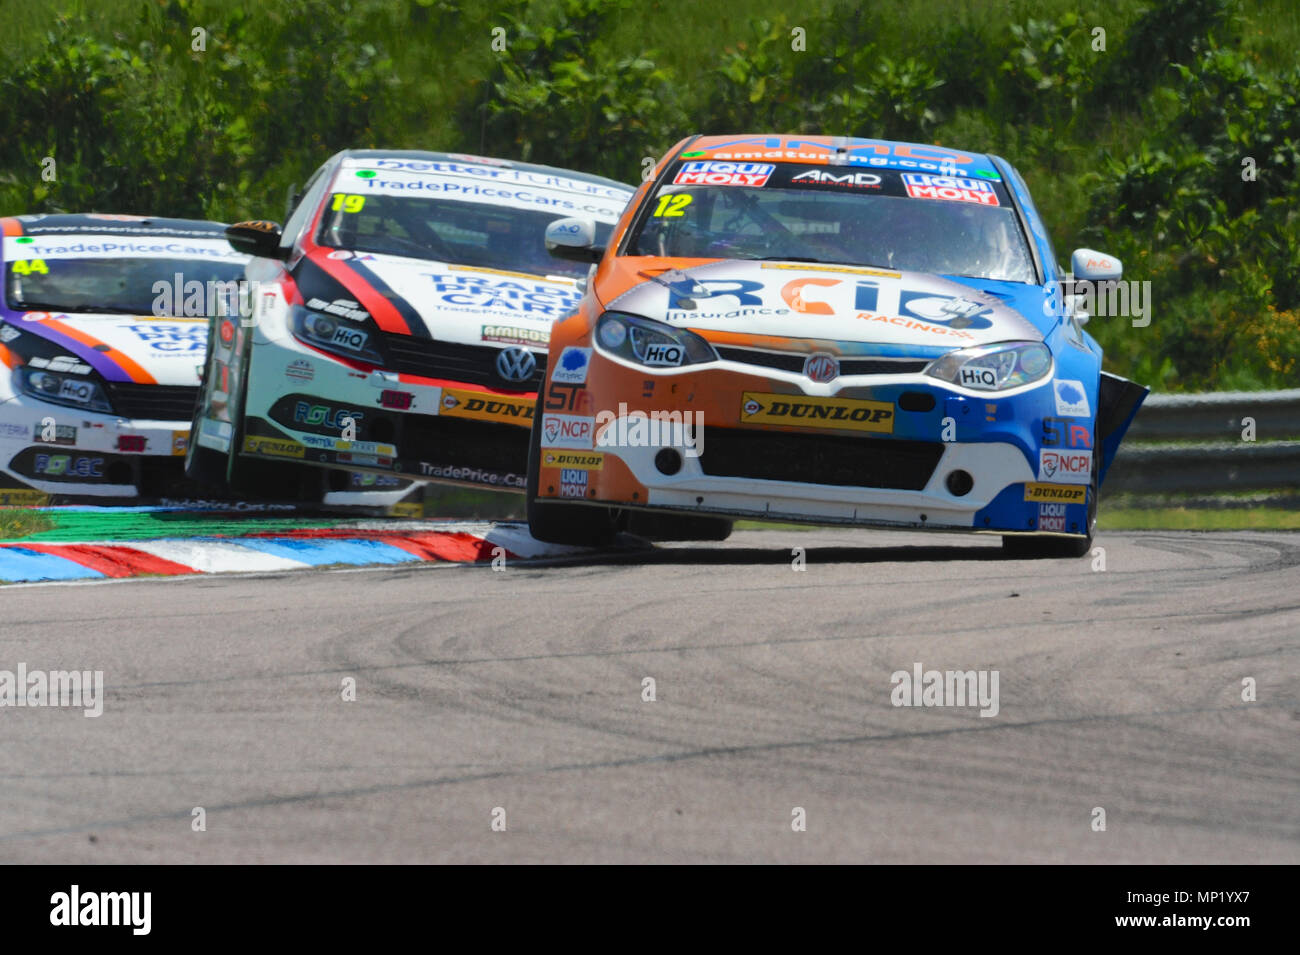 Andover, Hampshire, UK. 20th May, 2018. Tom Boardman (AmD with AutoAid/RCIB Insurance Racing) racing at Thruxton Race Circuit during the Dunlop MSA British Touring Car Championship at Thruxton Race Circuit, Andover, Hampshire, United Kingdom. Cars behind are Bobby Thompson (Team HARD/Trade Price Cars) and Michael Caine (Team HARD/Trade Price Cars). With the highest average speed of any track visited by the BTCC, Thruxton's 2.4 mile circuit provides some of the biggest thrills and spills in motor sport and has earned a reputation of being a true driver's track. Stock Photo